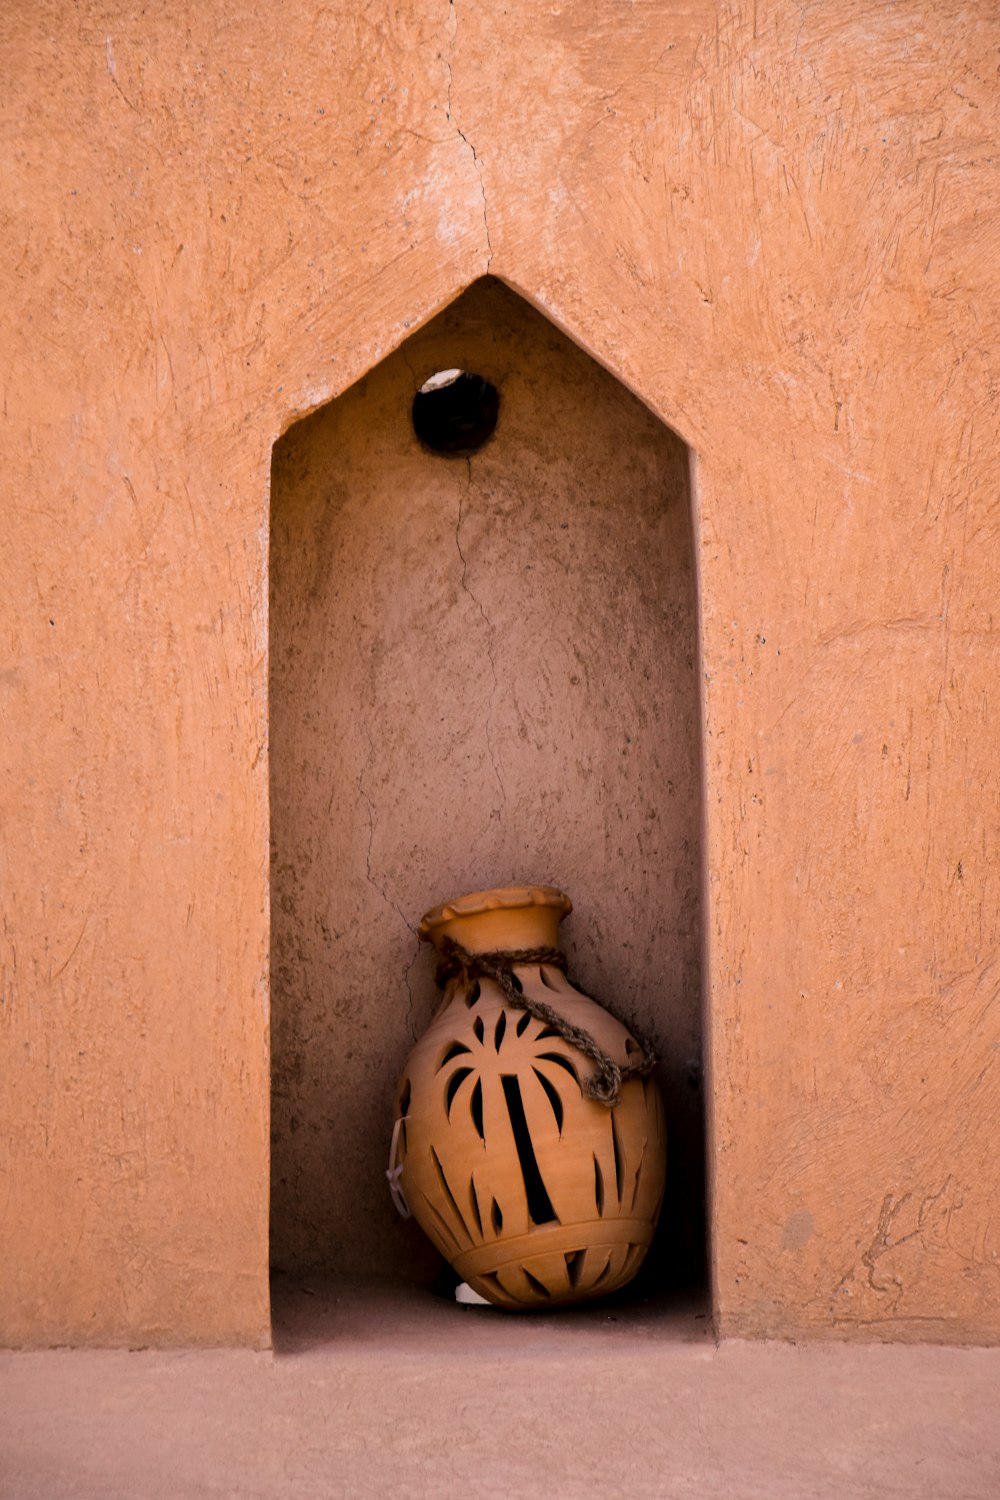 a vase sitting in a corner of a building